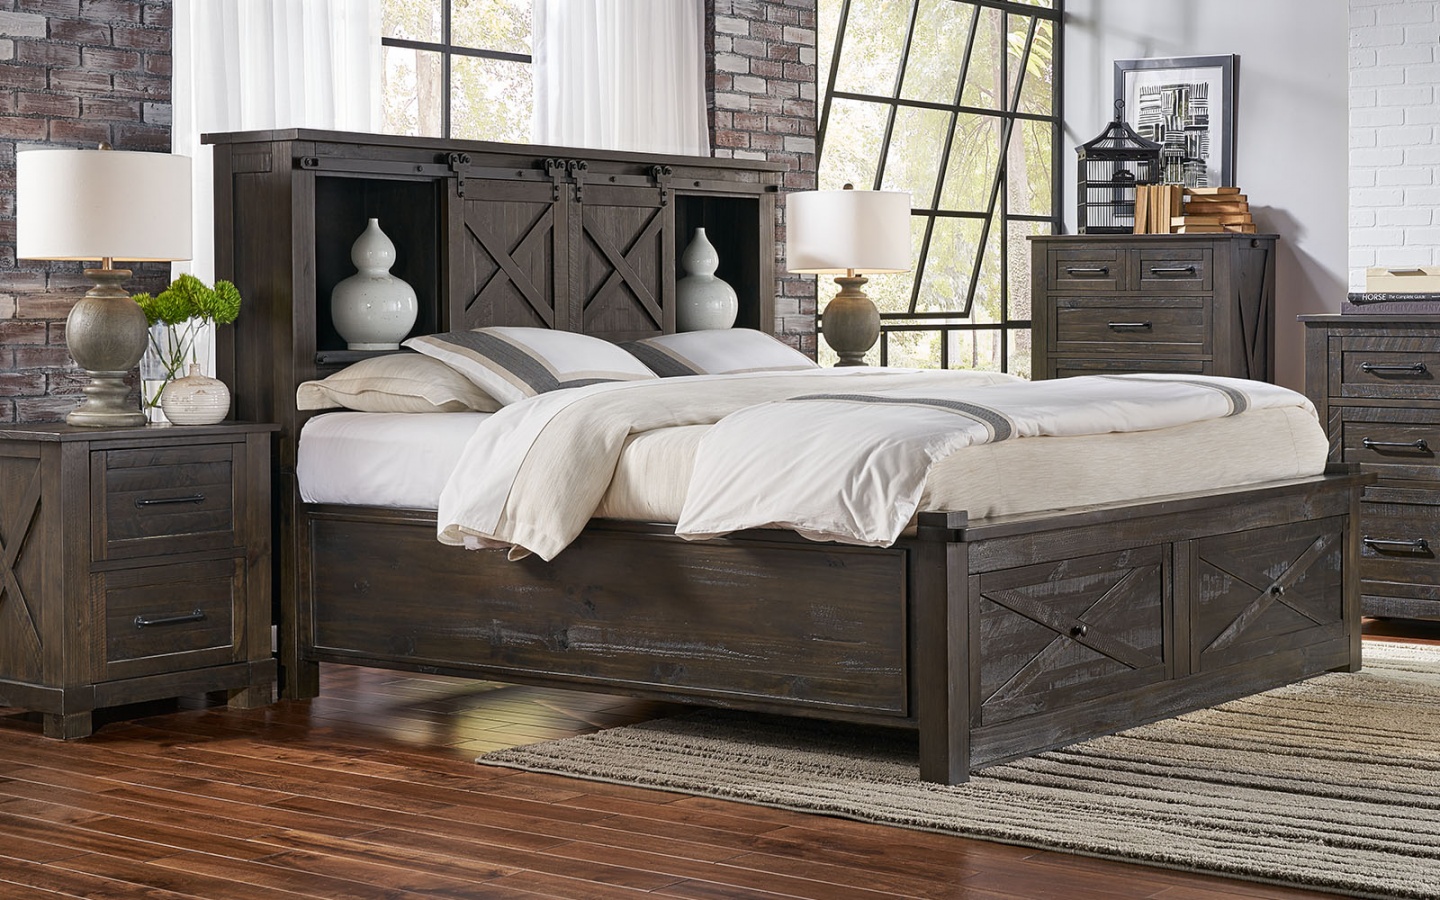 Sun Valley Storage Bed Old Cannery, King Bed Set With Storage